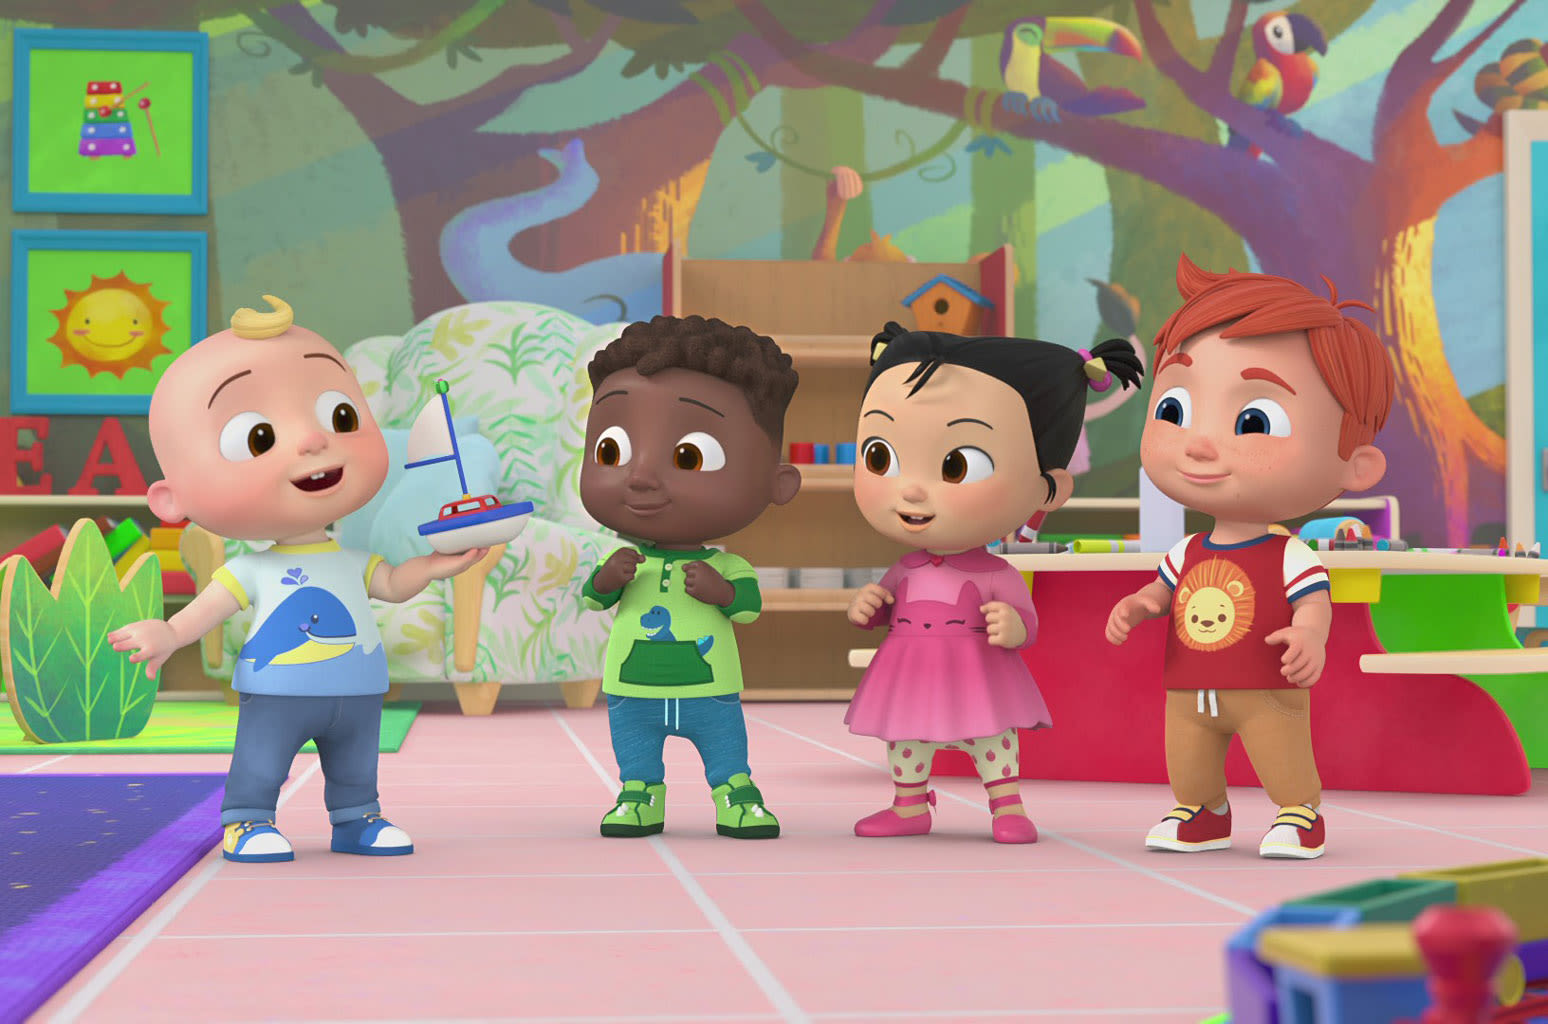 CoComelon Children’s Anthem ‘Wheels on the Bus’ Rides Onto Global Excl. U.S. Chart